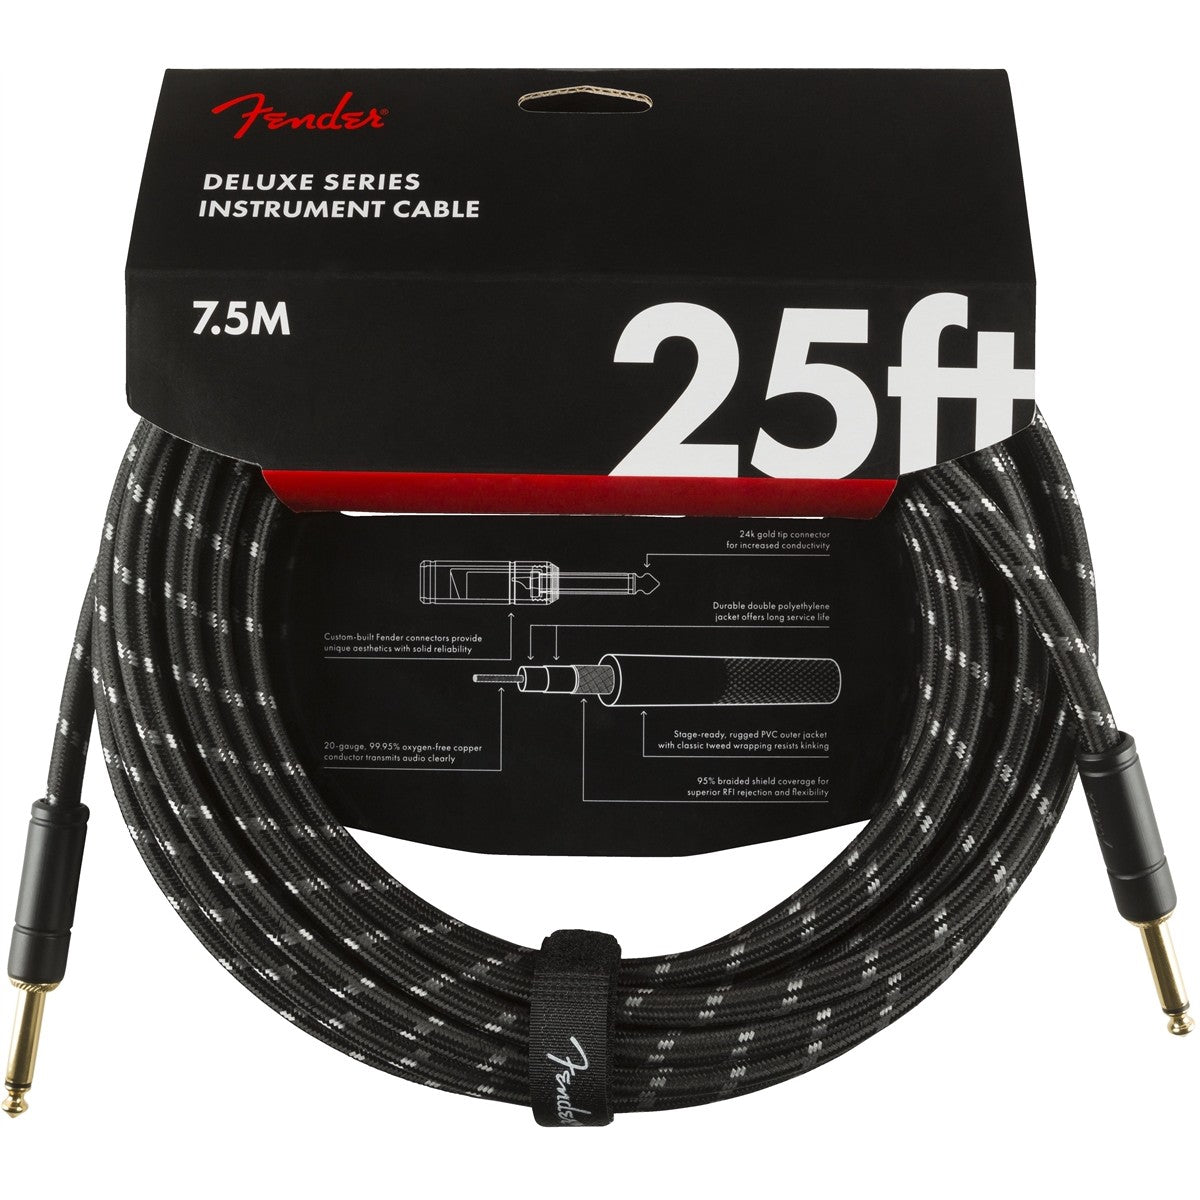 Dây Cáp Kết Nối Fender Deluxe Series Tweed Instrument Cable, 2 Đầu Thẳng - Việt Music